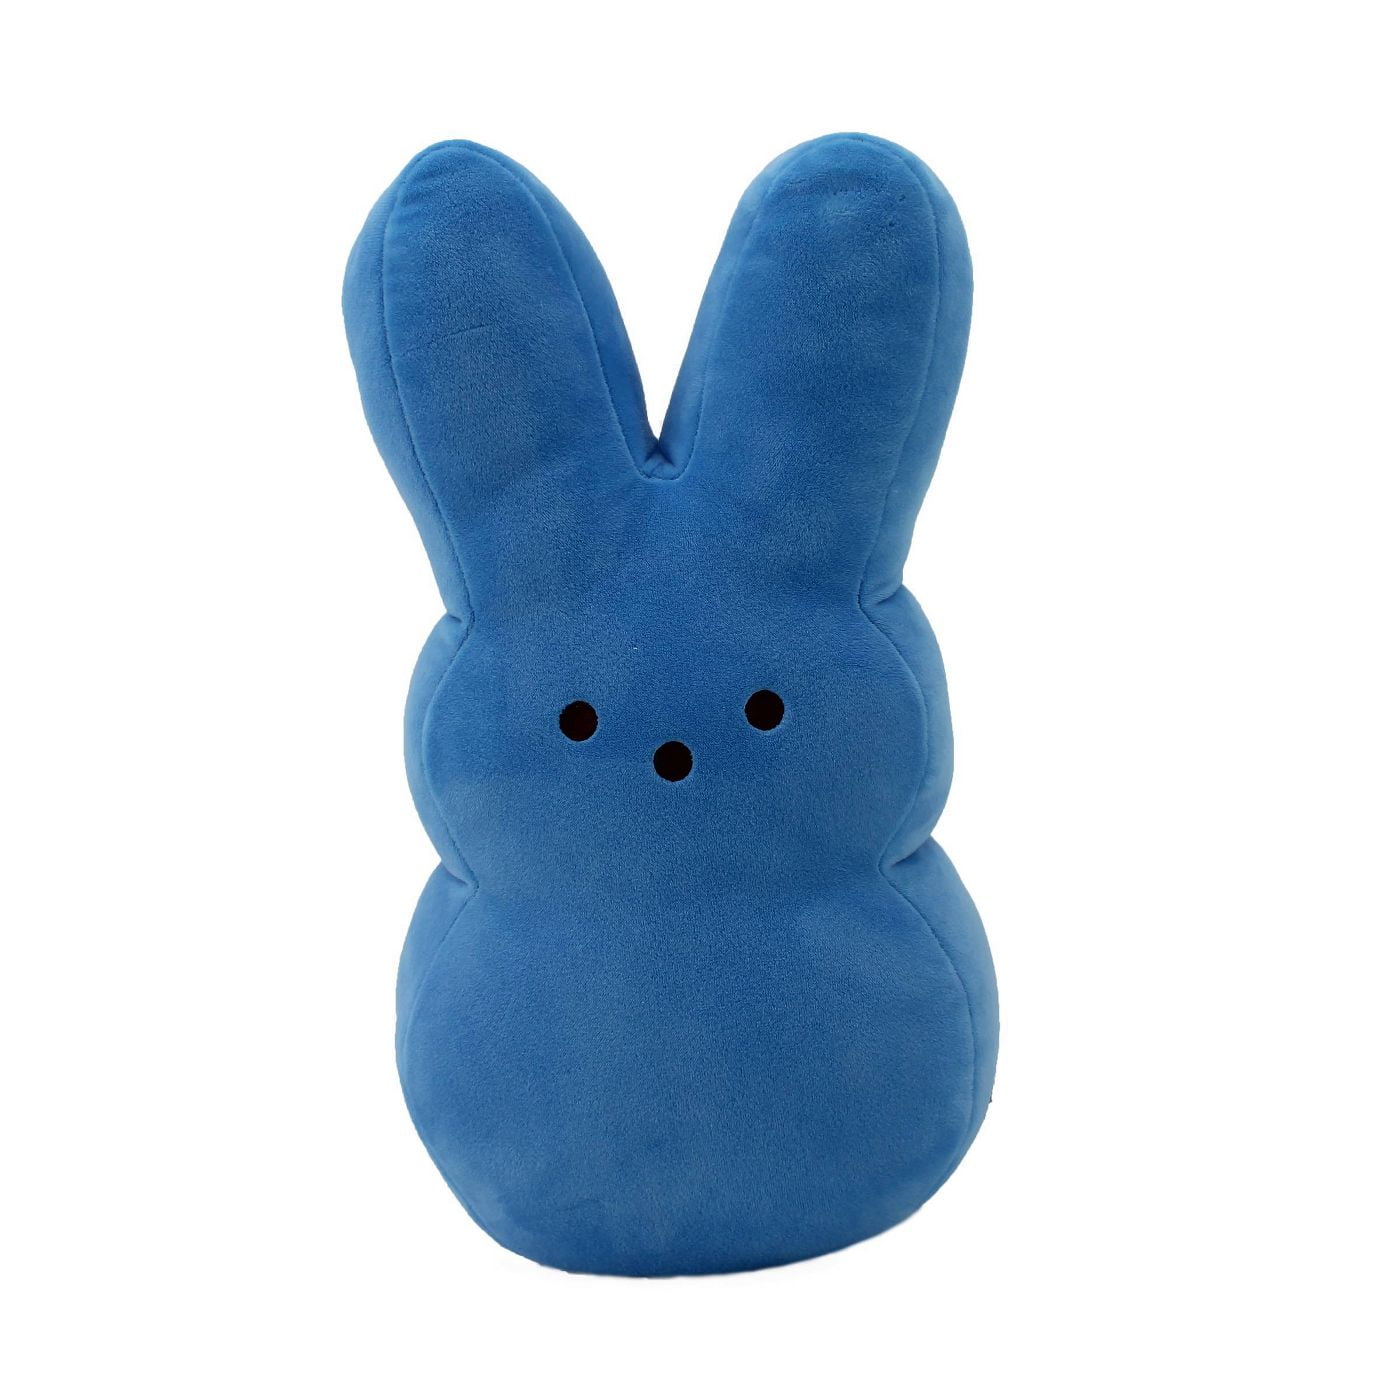 Details about   Peeps Blue Bunny Plush Velour Easter 2015 Just Born Pillow Stuffed Animal 17" 